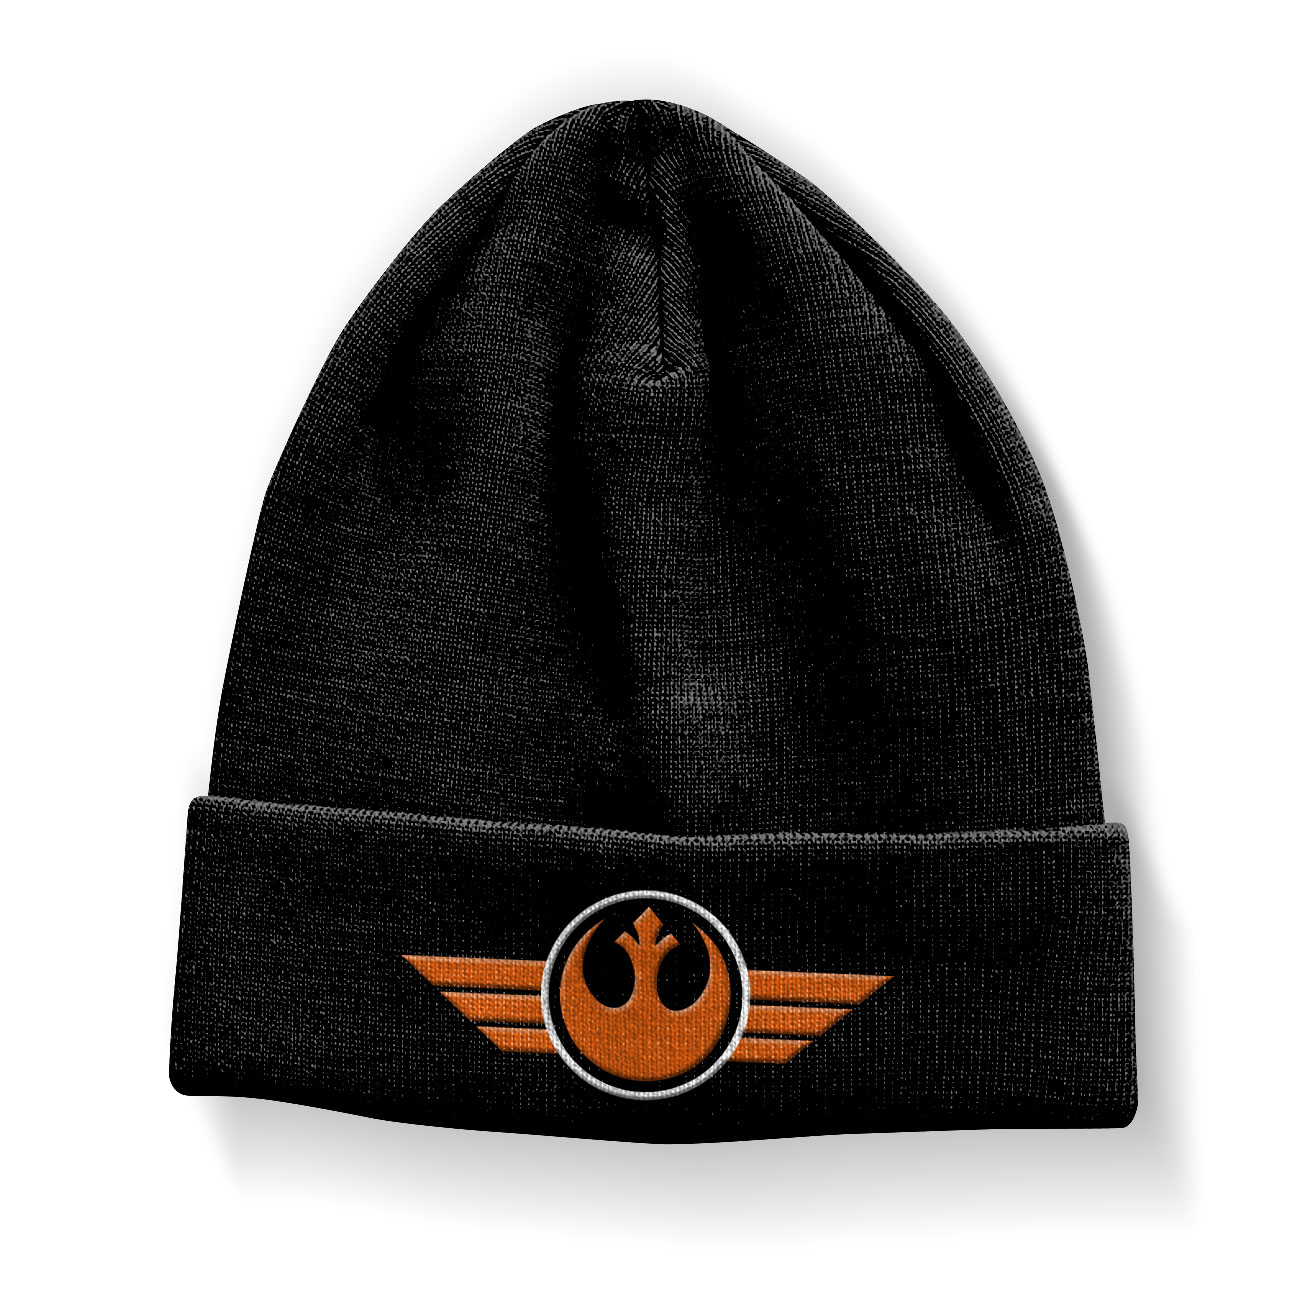 Join The Resistance Beanie